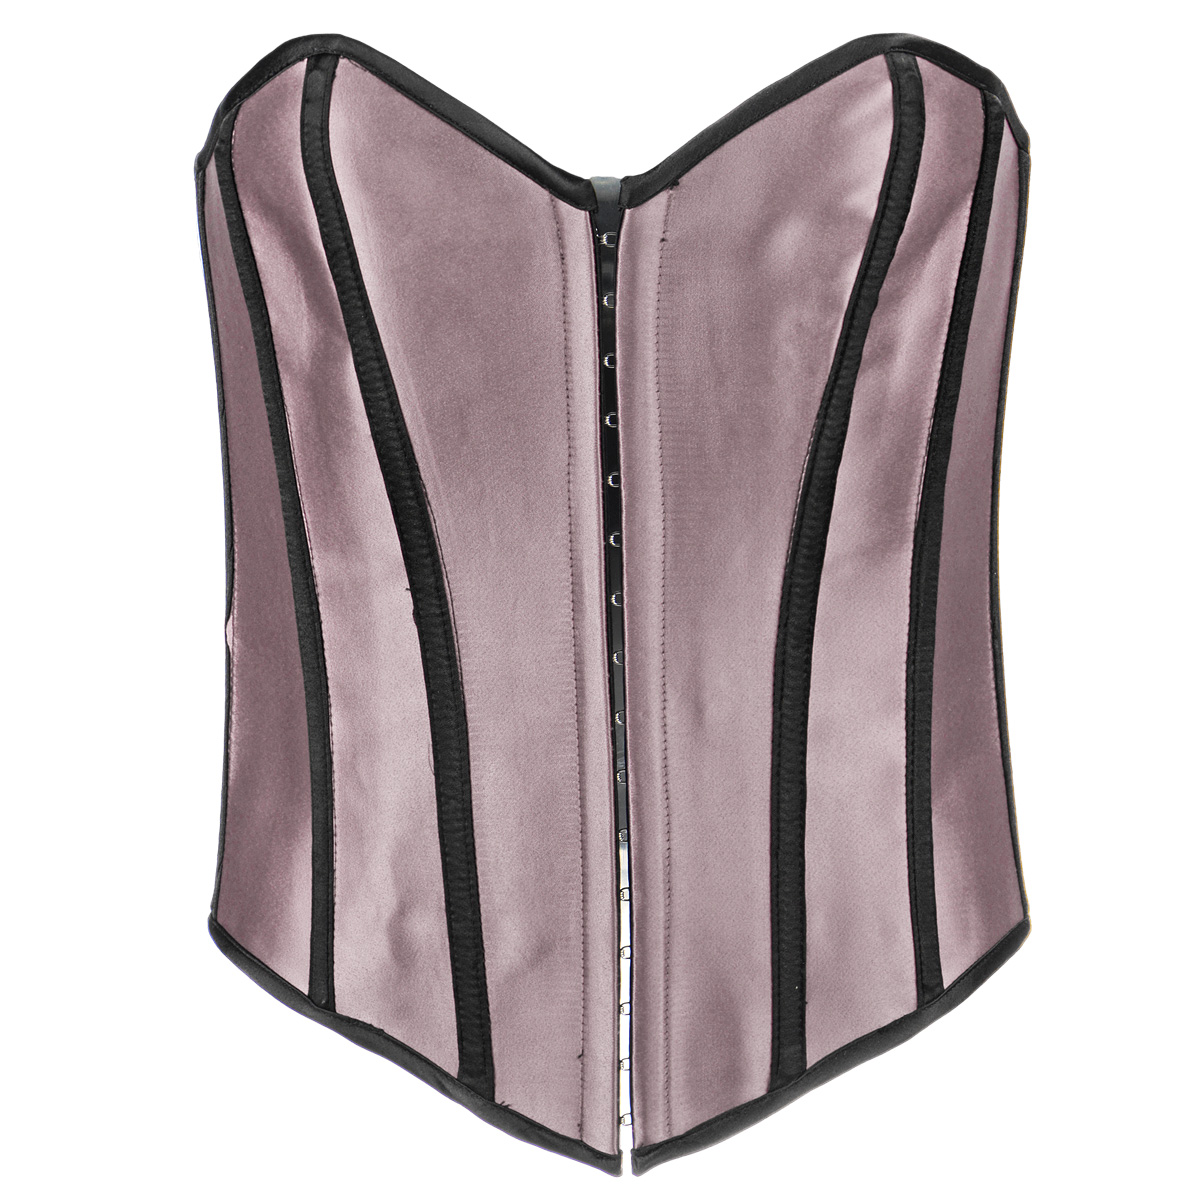   Satin Heart. C009 - Corsets by BaciC009-PKB    Satin Heart   Corsets by Baci Collection       Baci Lingerie    ,            .        .  ,      -   ,  .        ,     .    ,  ,     .